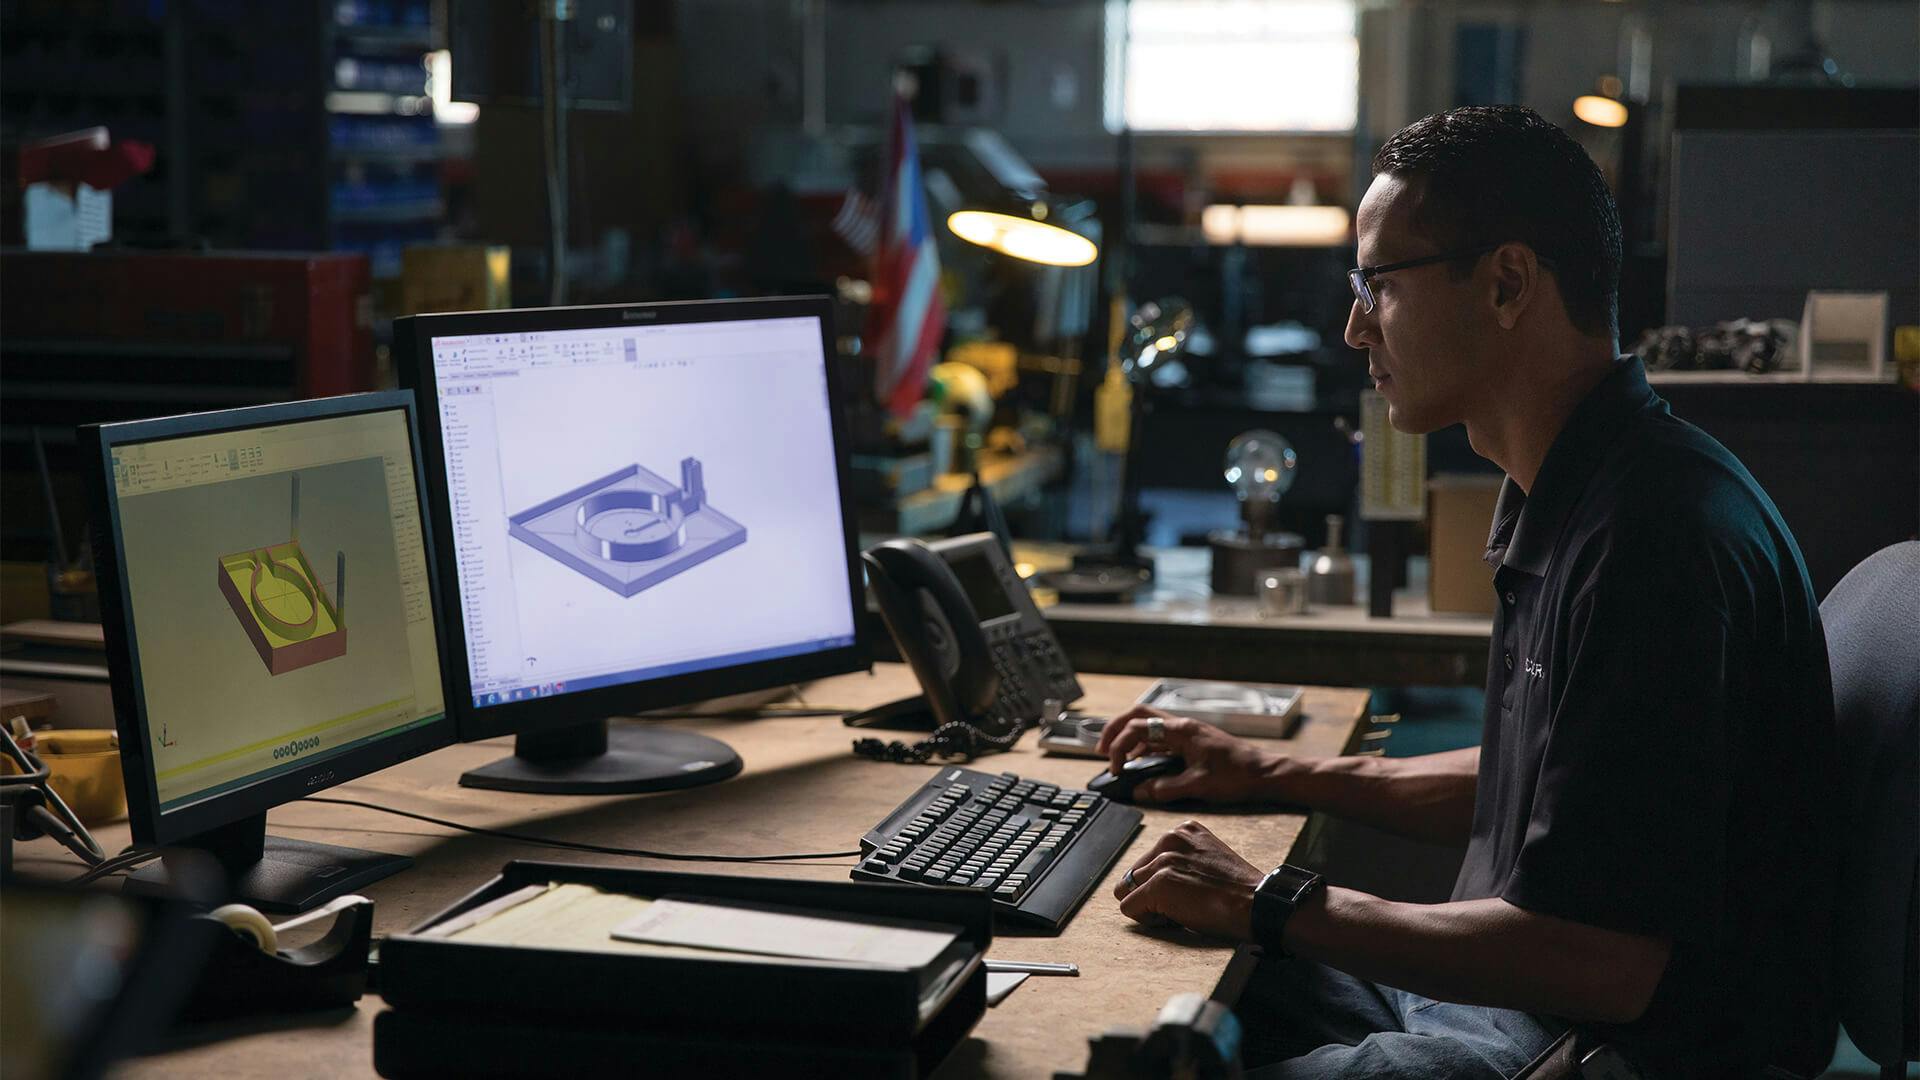 Man wearing polo inside office with technical design images on his computer monitors